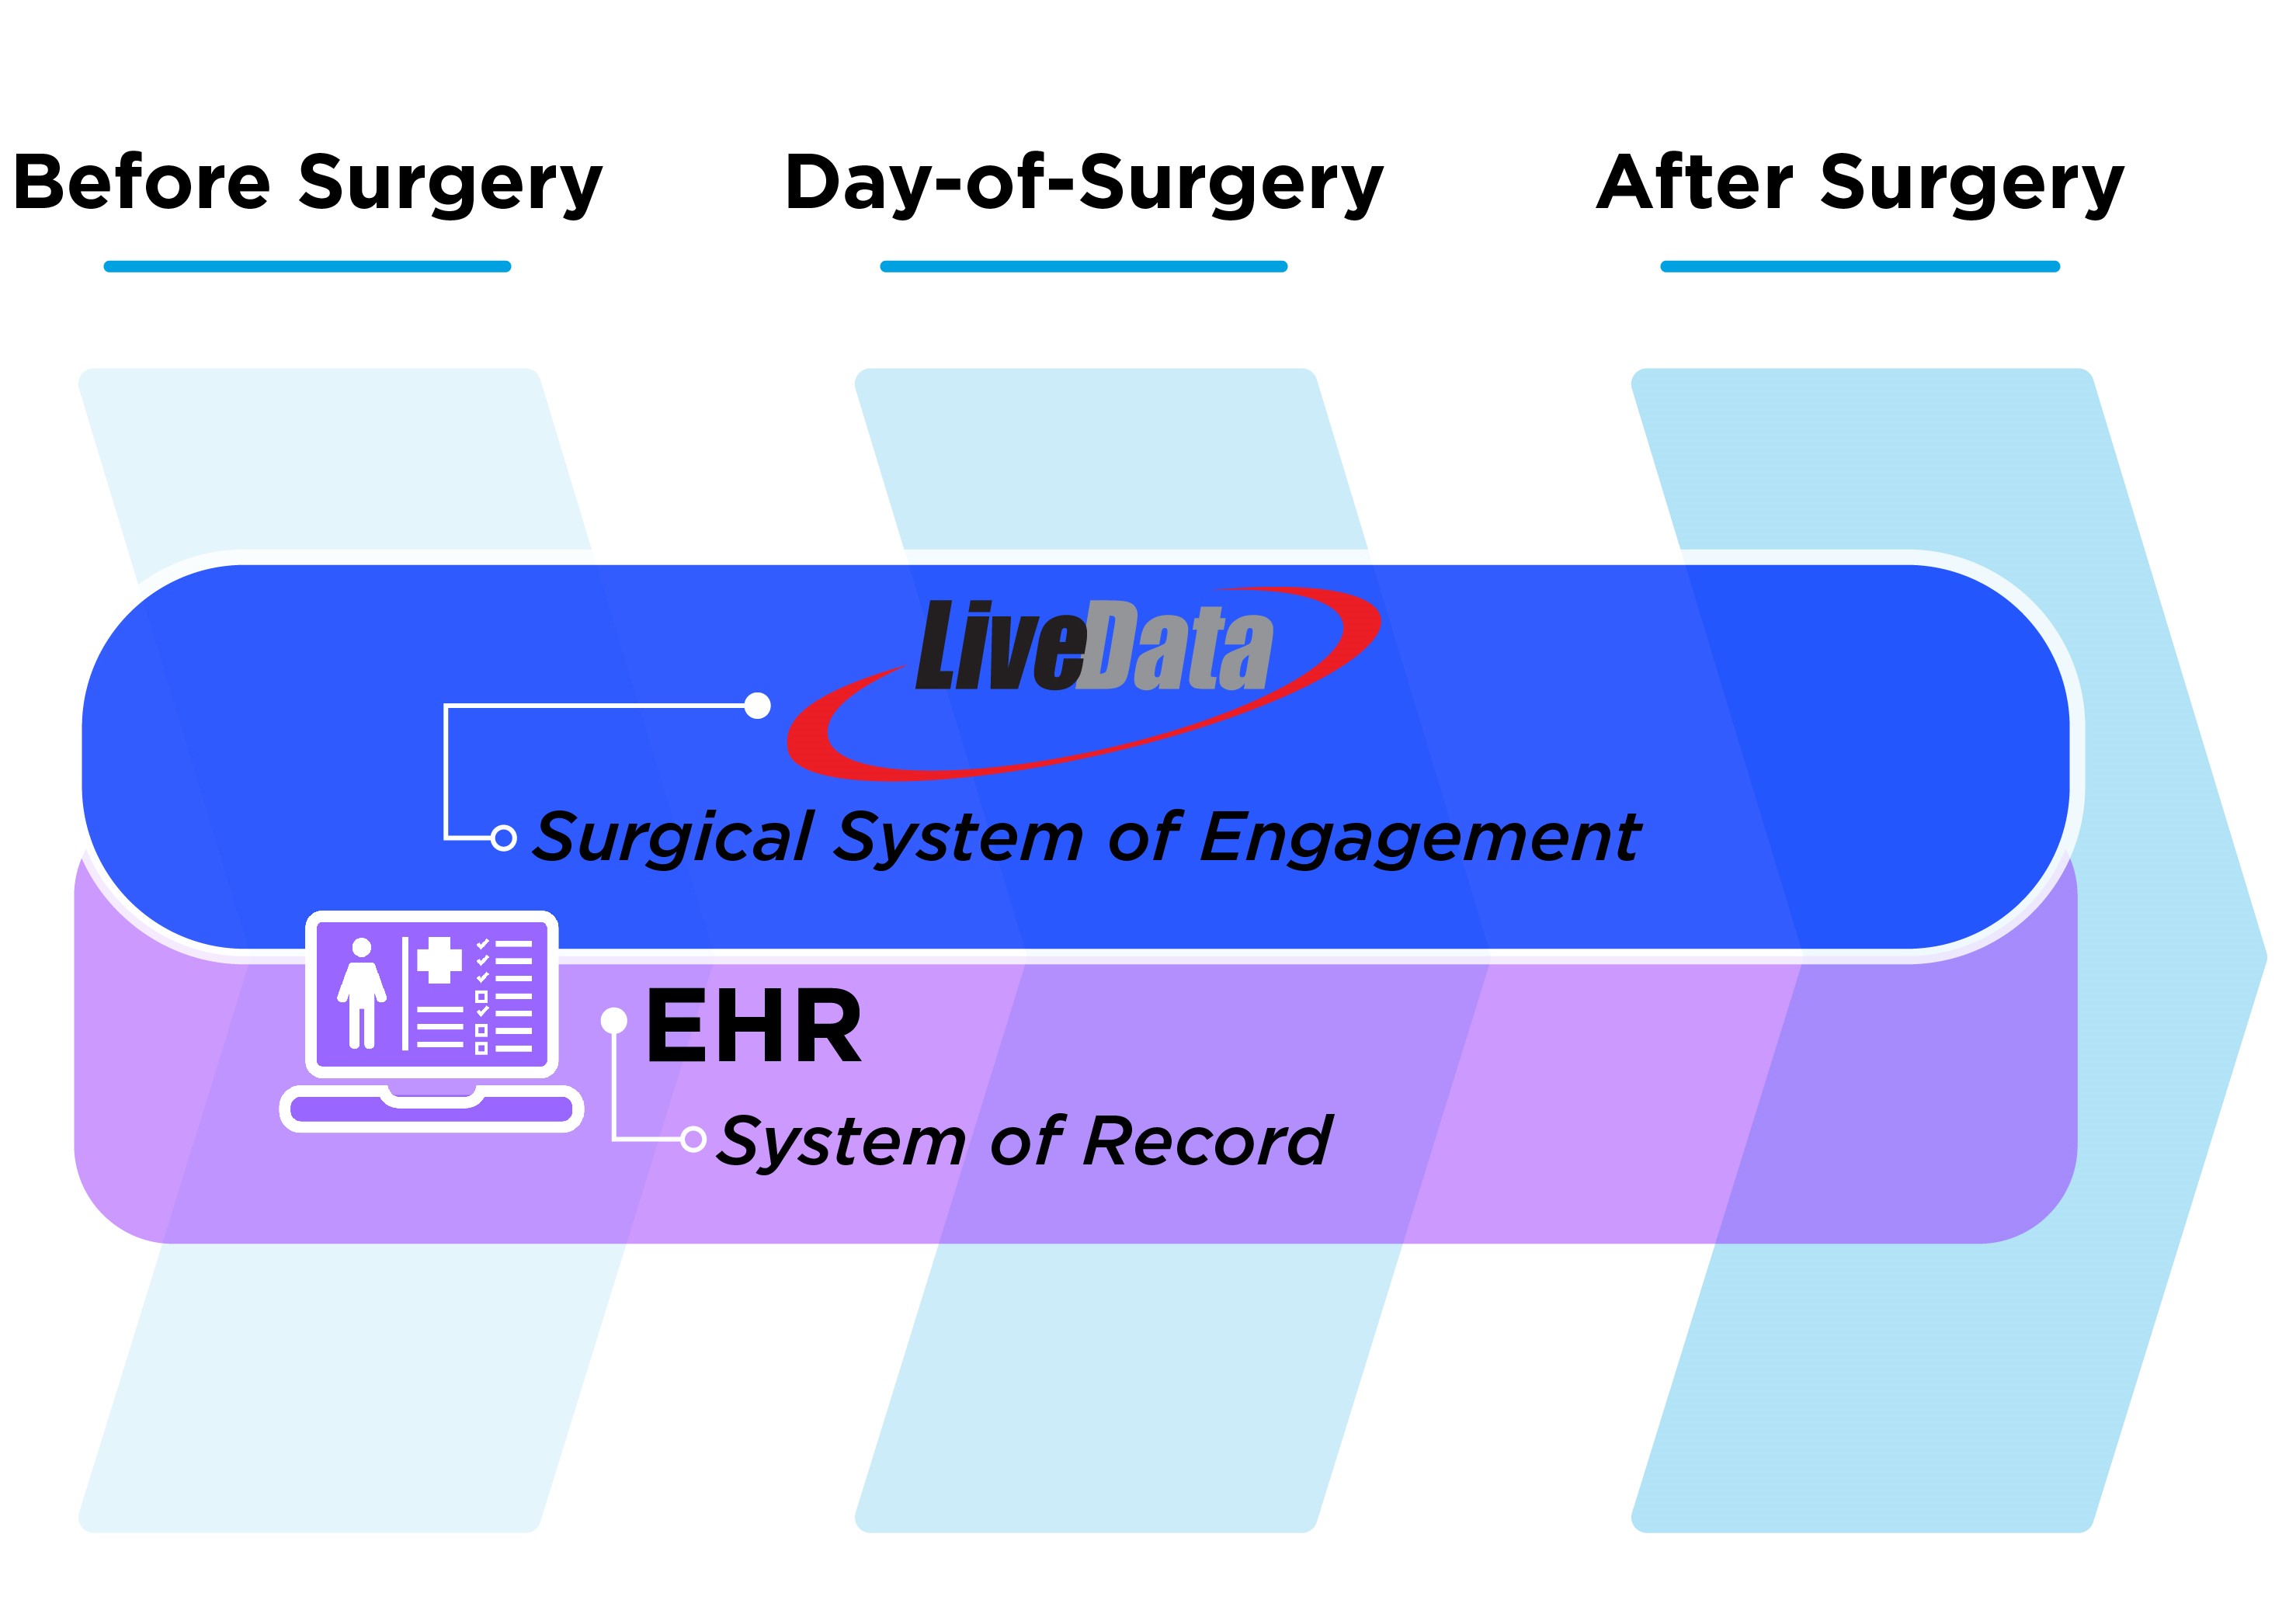 Graphic that demonstrates how LiveData acts as a surgical system of engagement that integrates on top of your existing EHR system of record for before, day-of, and post-surgery insights.